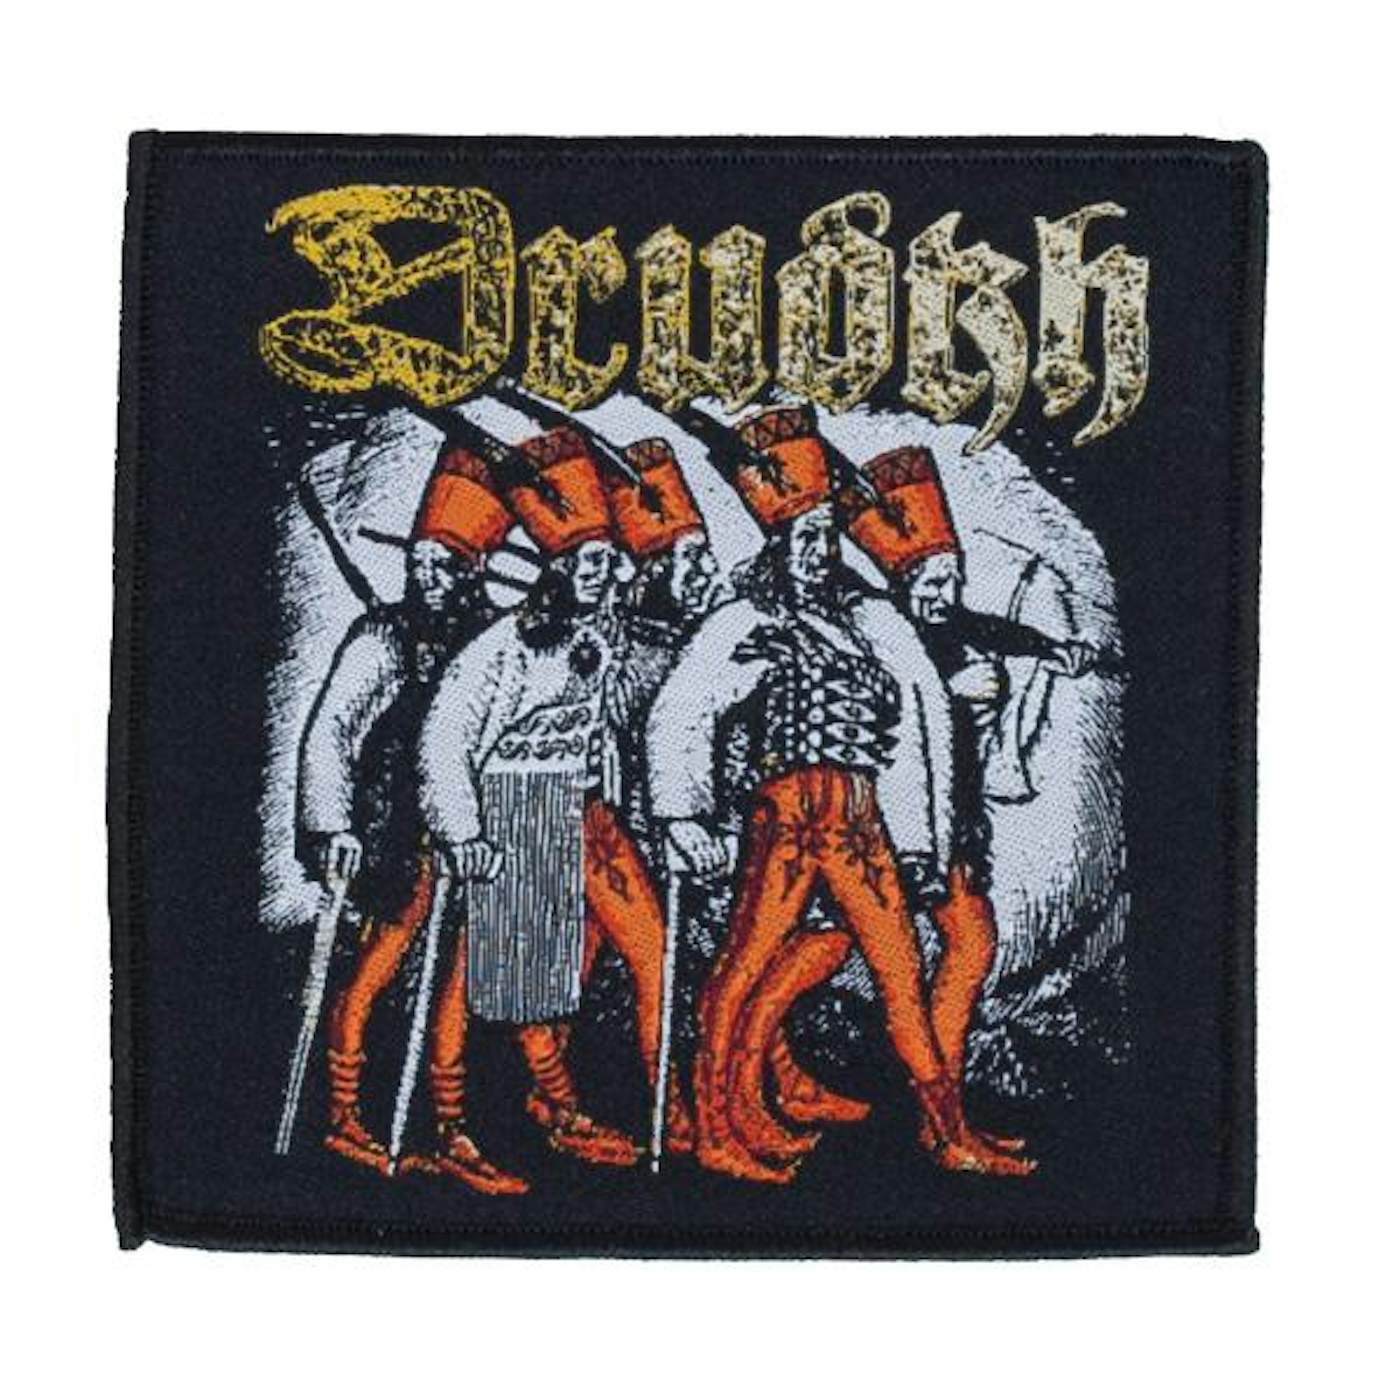 Drudkh "Eastern Frontier In Flames" Patch